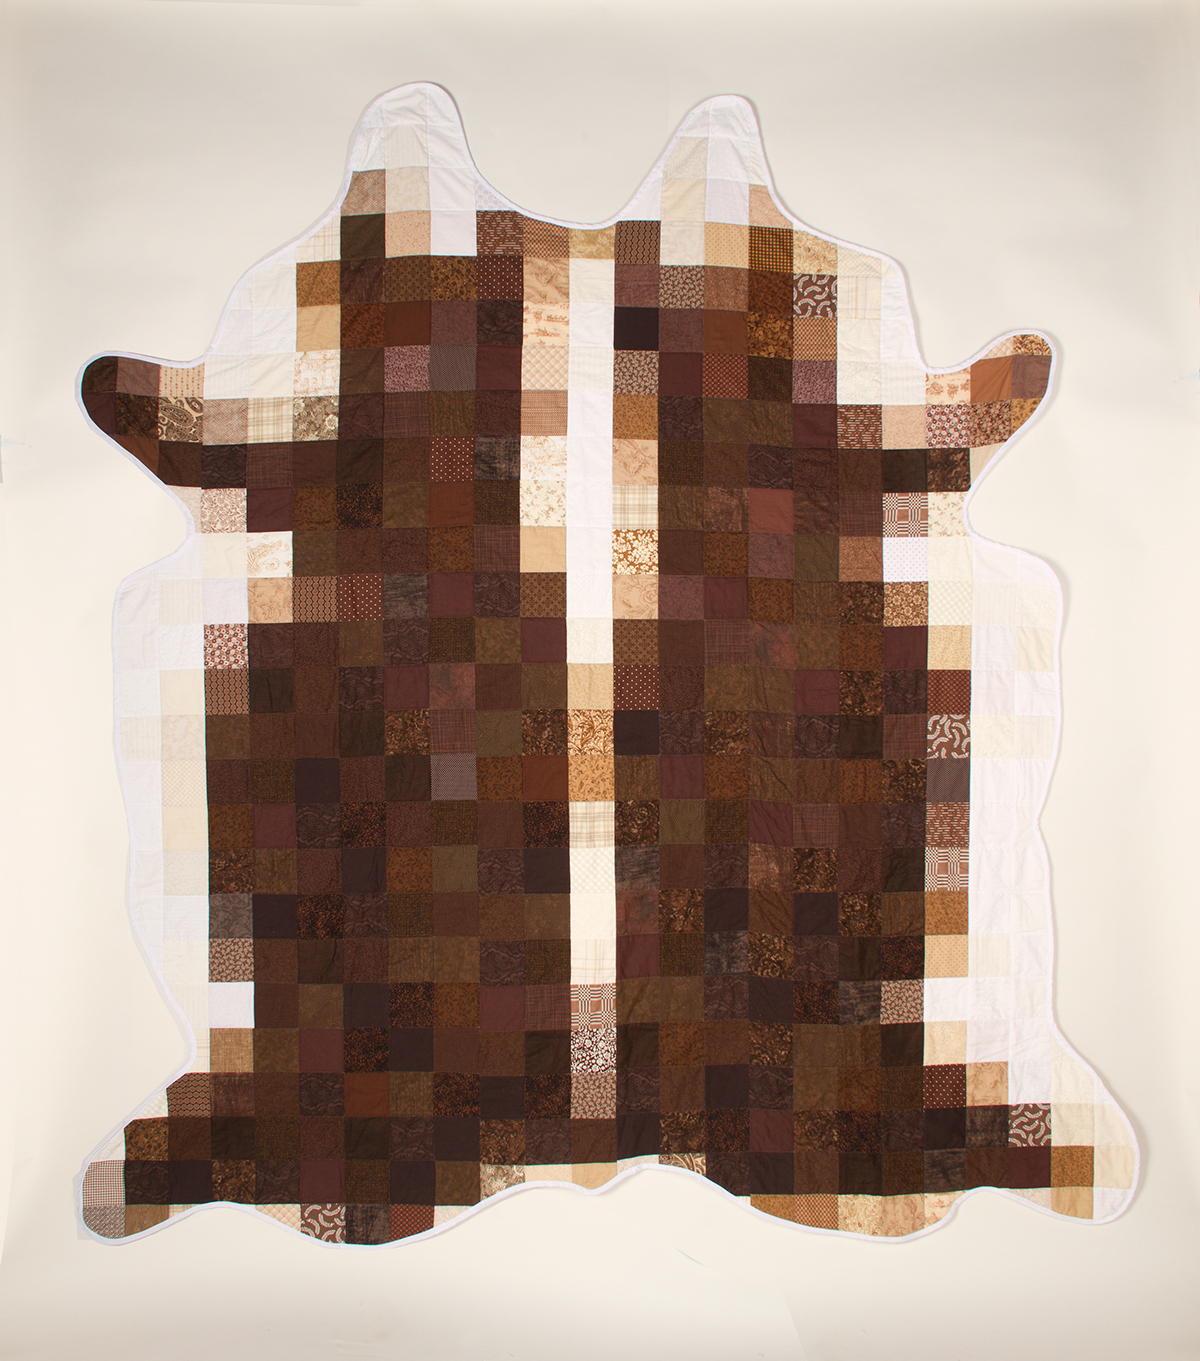 art animal quilt quilting sewing pixel brown White cow cowhide hide Cattle hereford Texas Longhorn calf